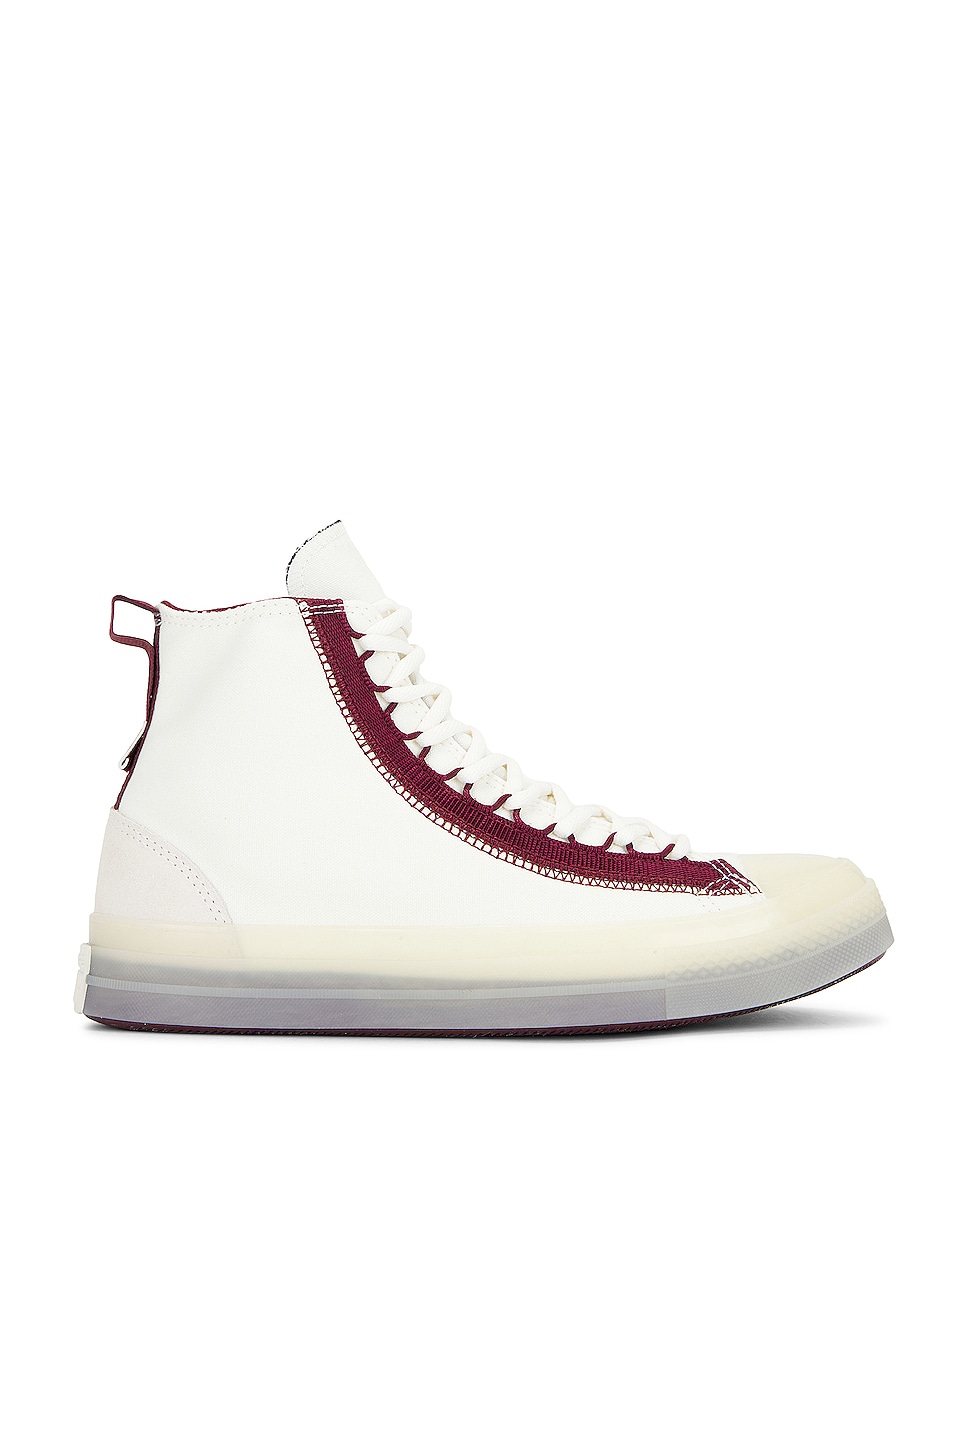 Image 1 of Converse Chuck Taylor All Star Cx Exp2 in Egret & Cherry Daze